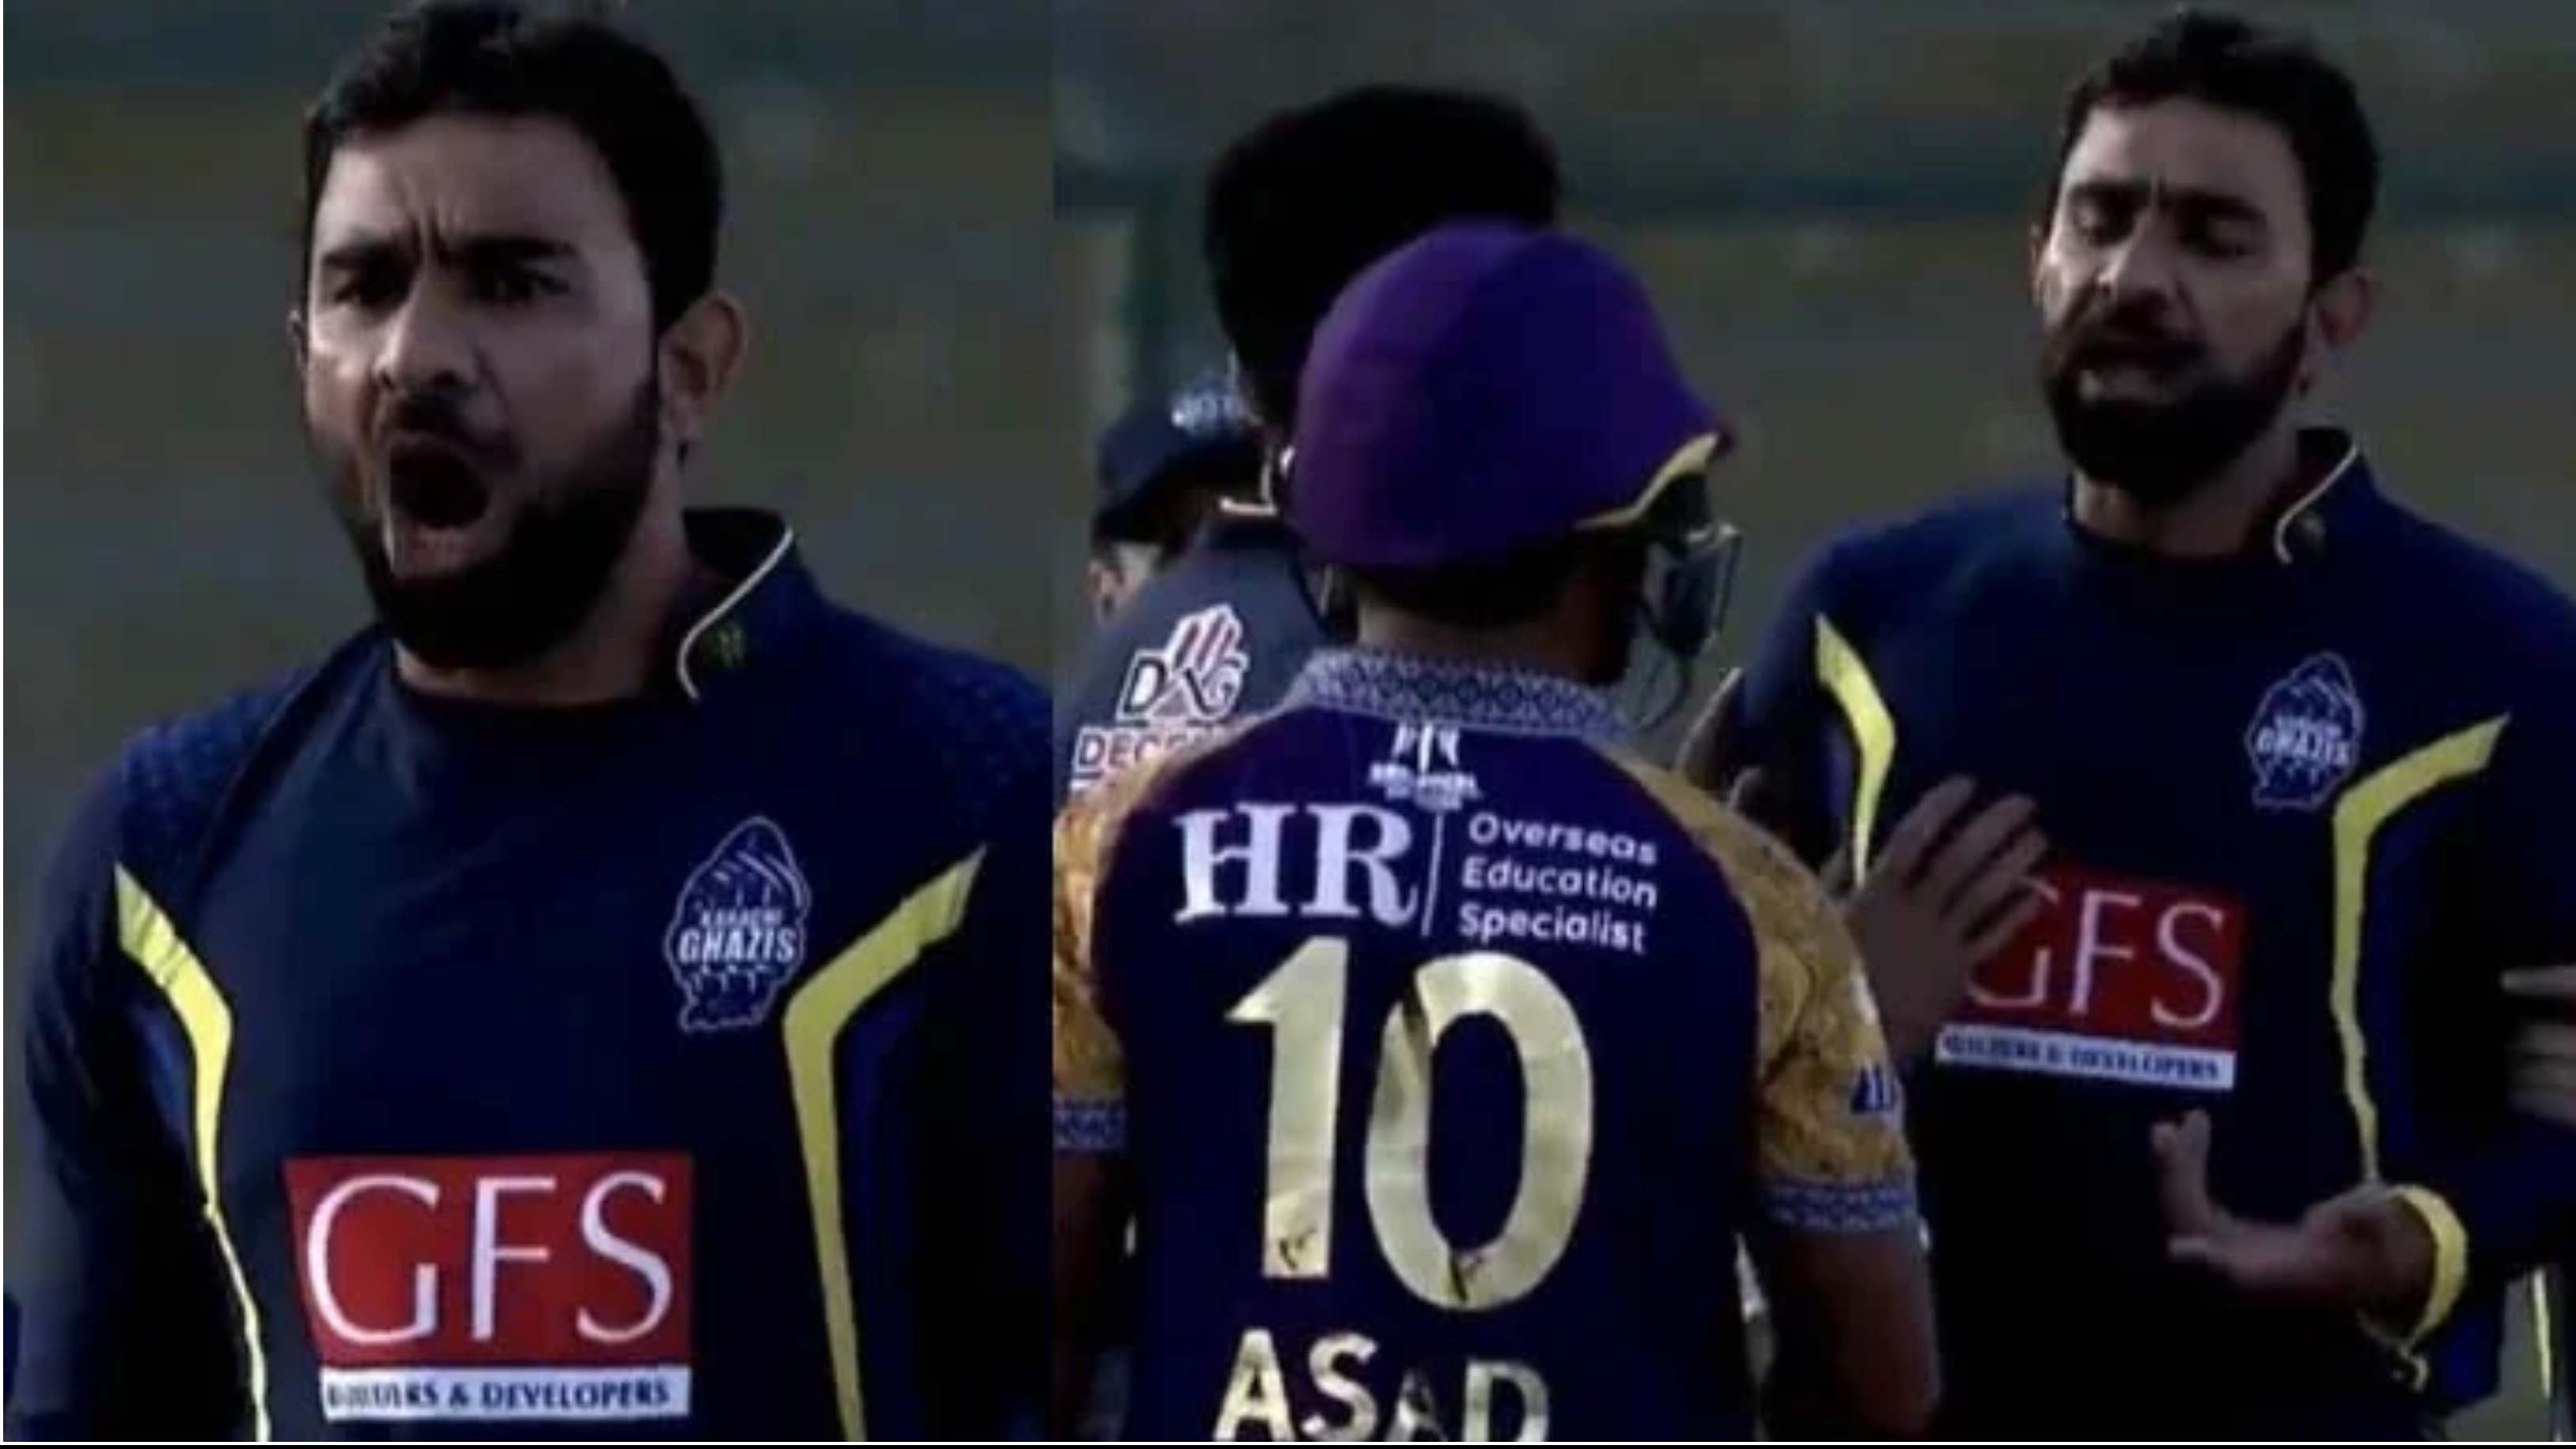 WATCH: Iftikhar Ahmed issues apology after heated exchange with Asad Shafiq during Sindh Premier League match